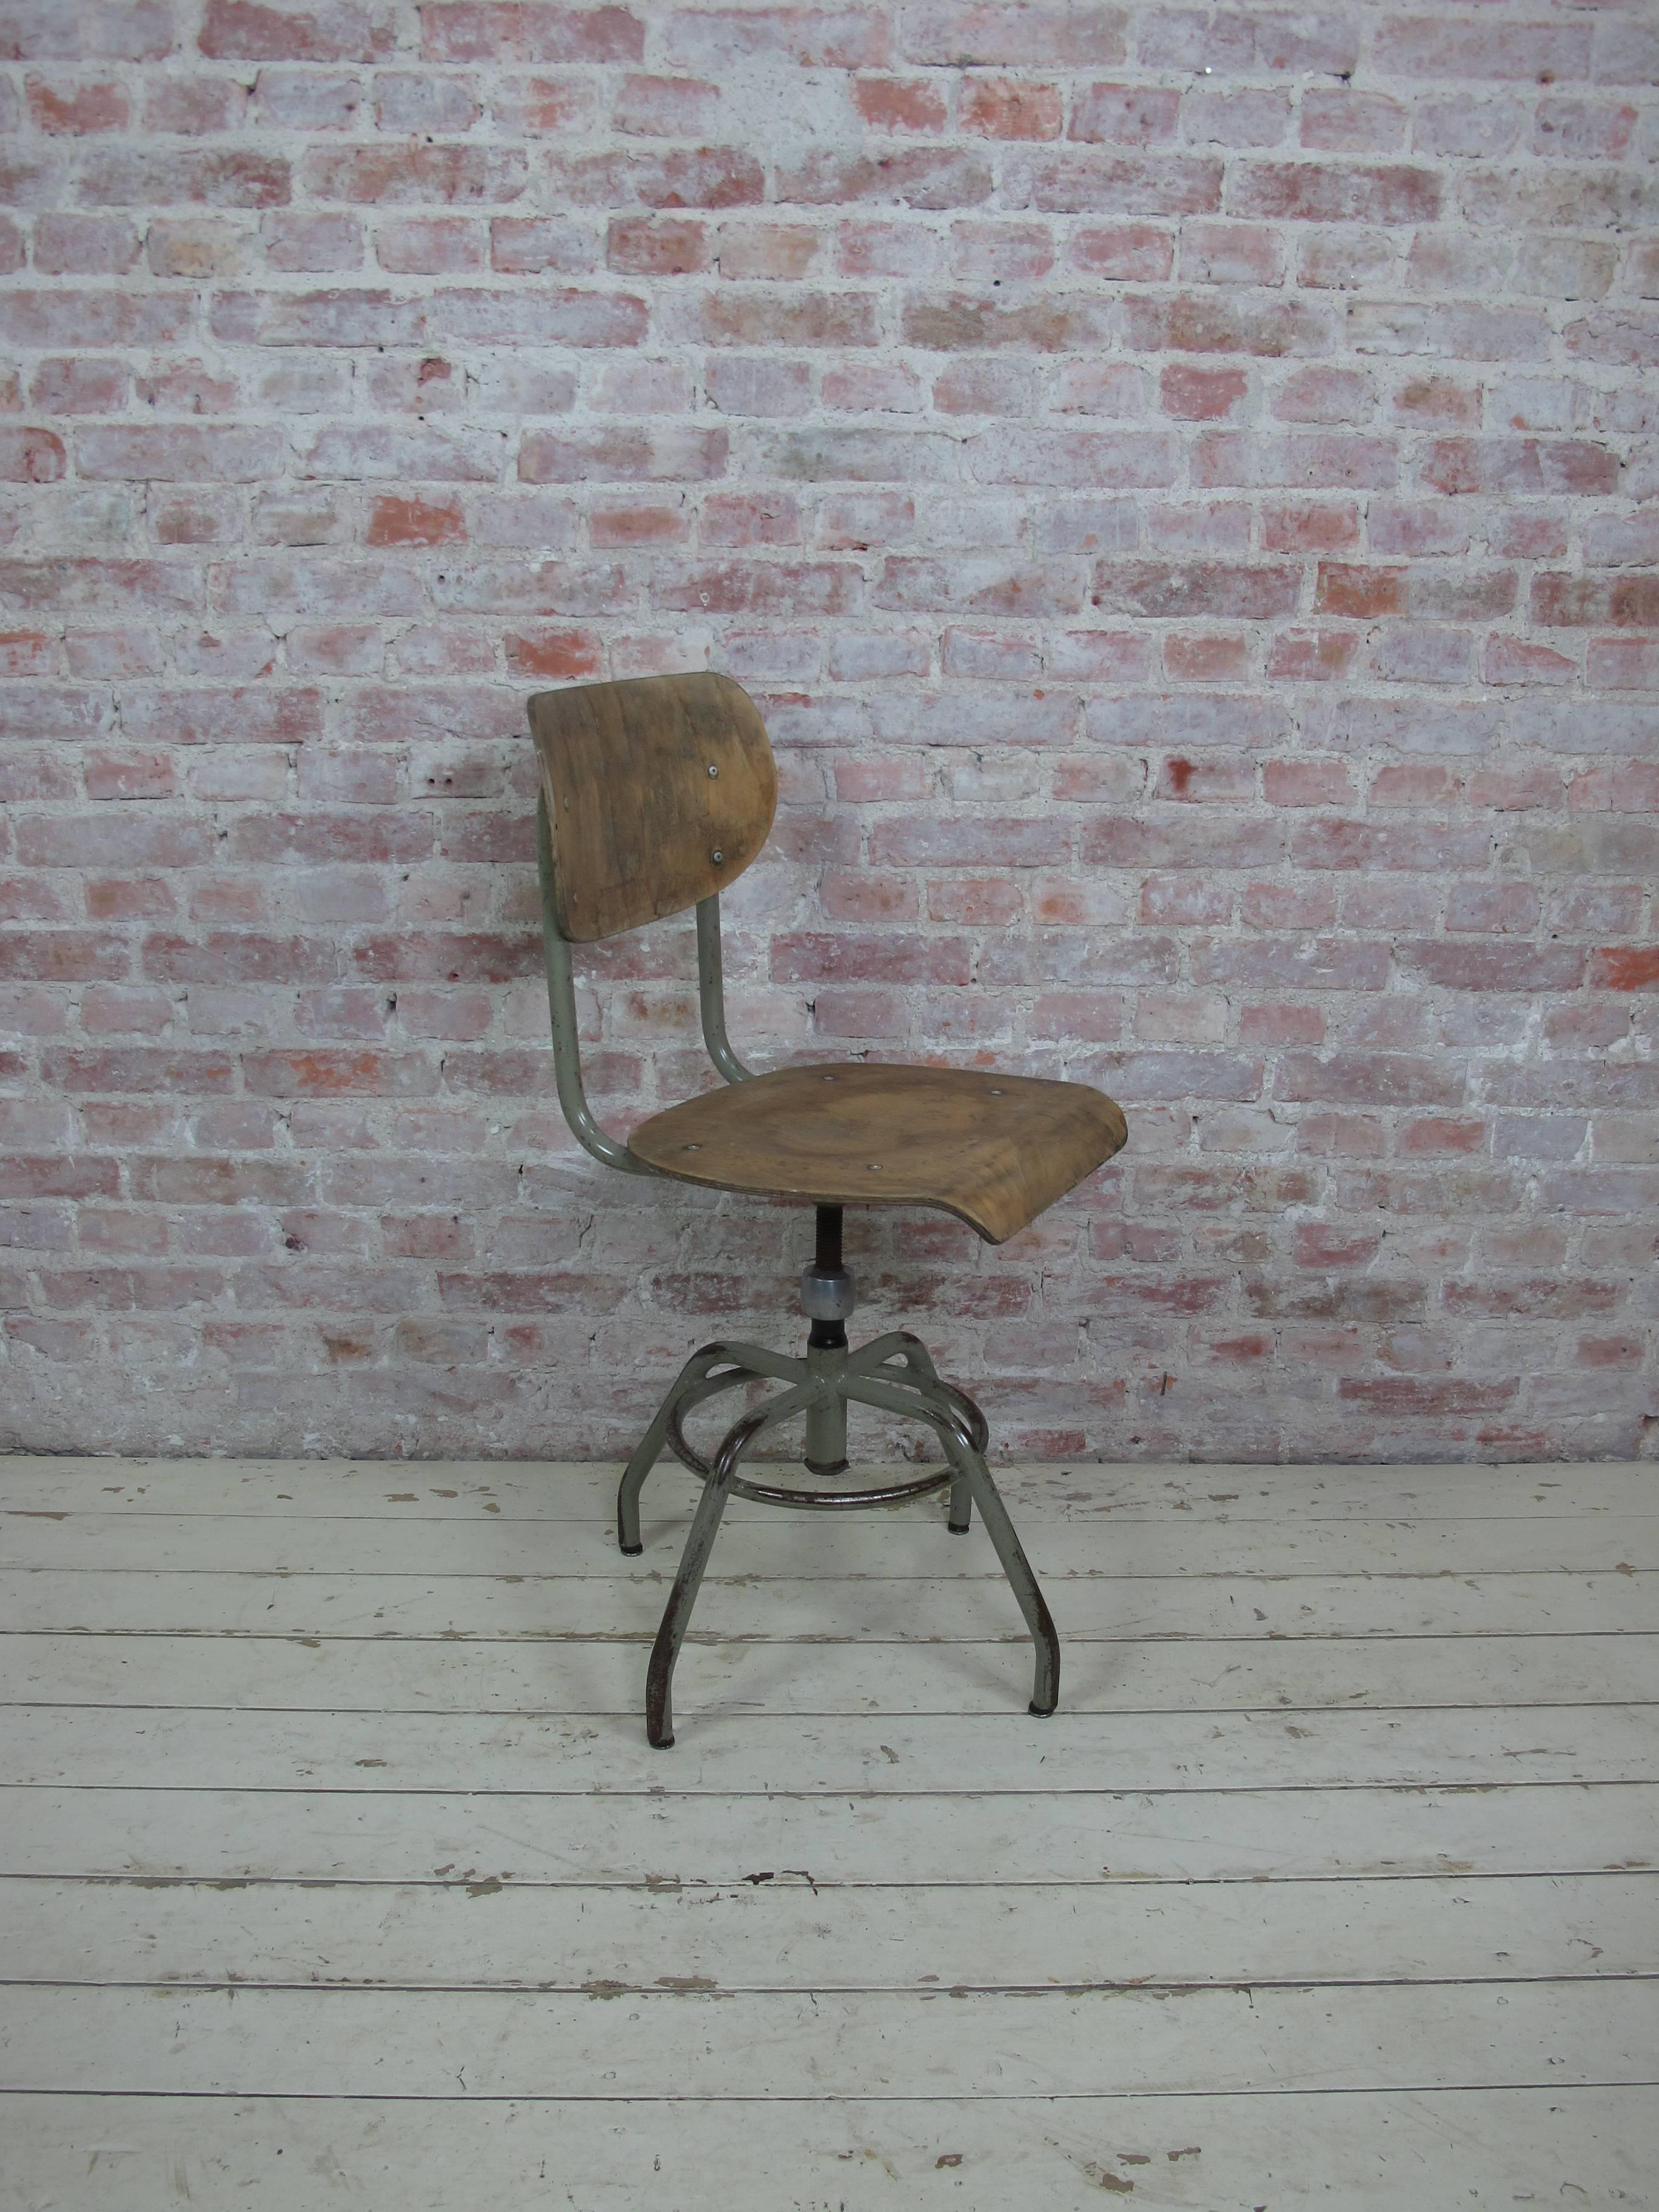 Unique Industrial pivot stools by the Belgian brand Tubax. Produced between 1973 and 1981. Seat height adjustable up to 58 cm. There are four stools available.